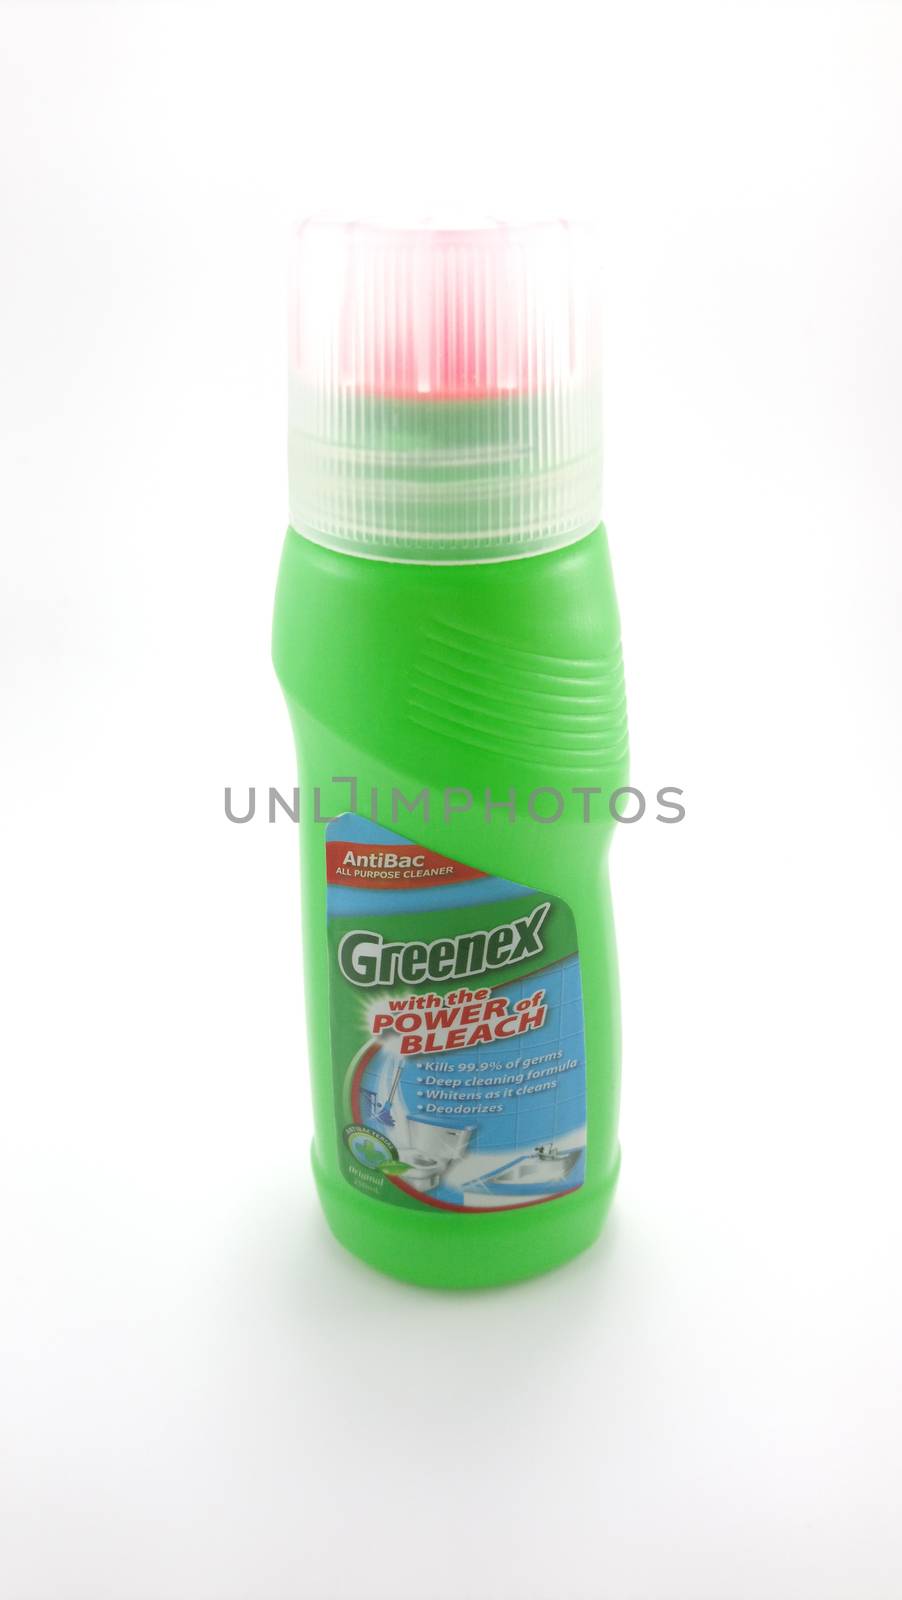 Greenex all purpose cleaner in Manila, Philippines by imwaltersy